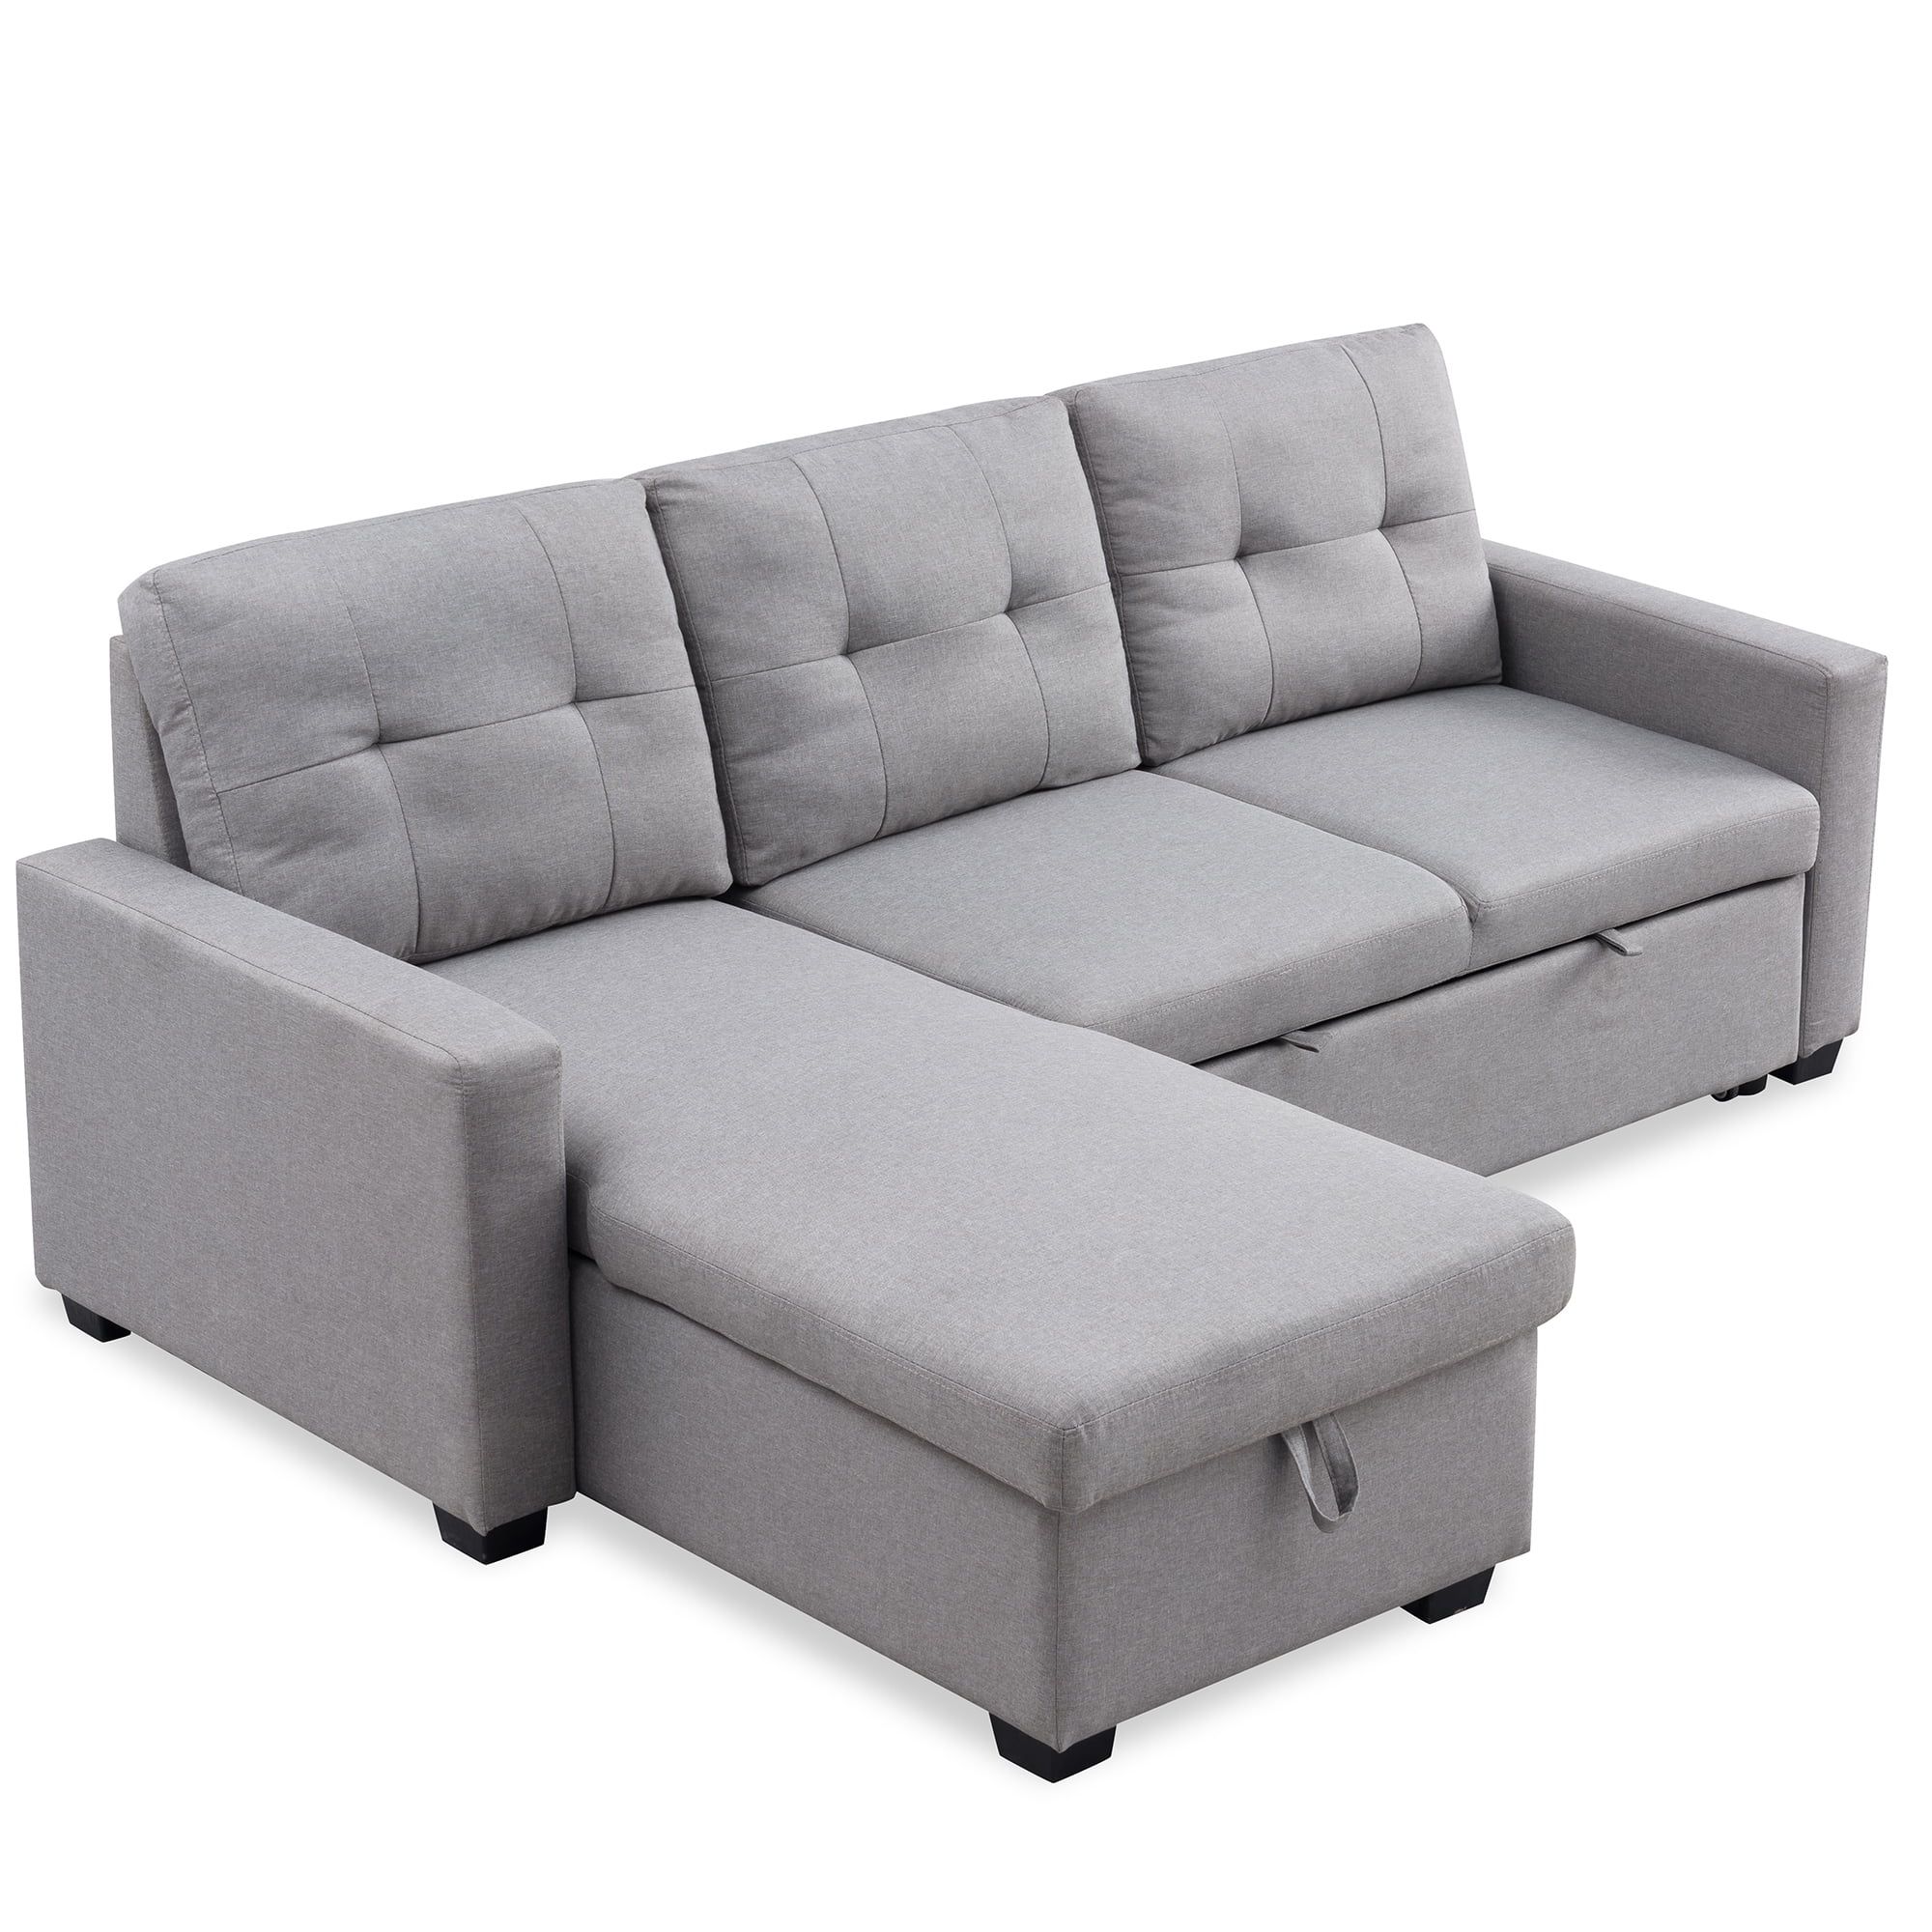 Mid Century Sectional Sofa With Pull Out Sleeper, 82" X 60" X 35 Pertaining To 2 In 1 Gray Pull Out Sofa Beds (View 14 of 20)